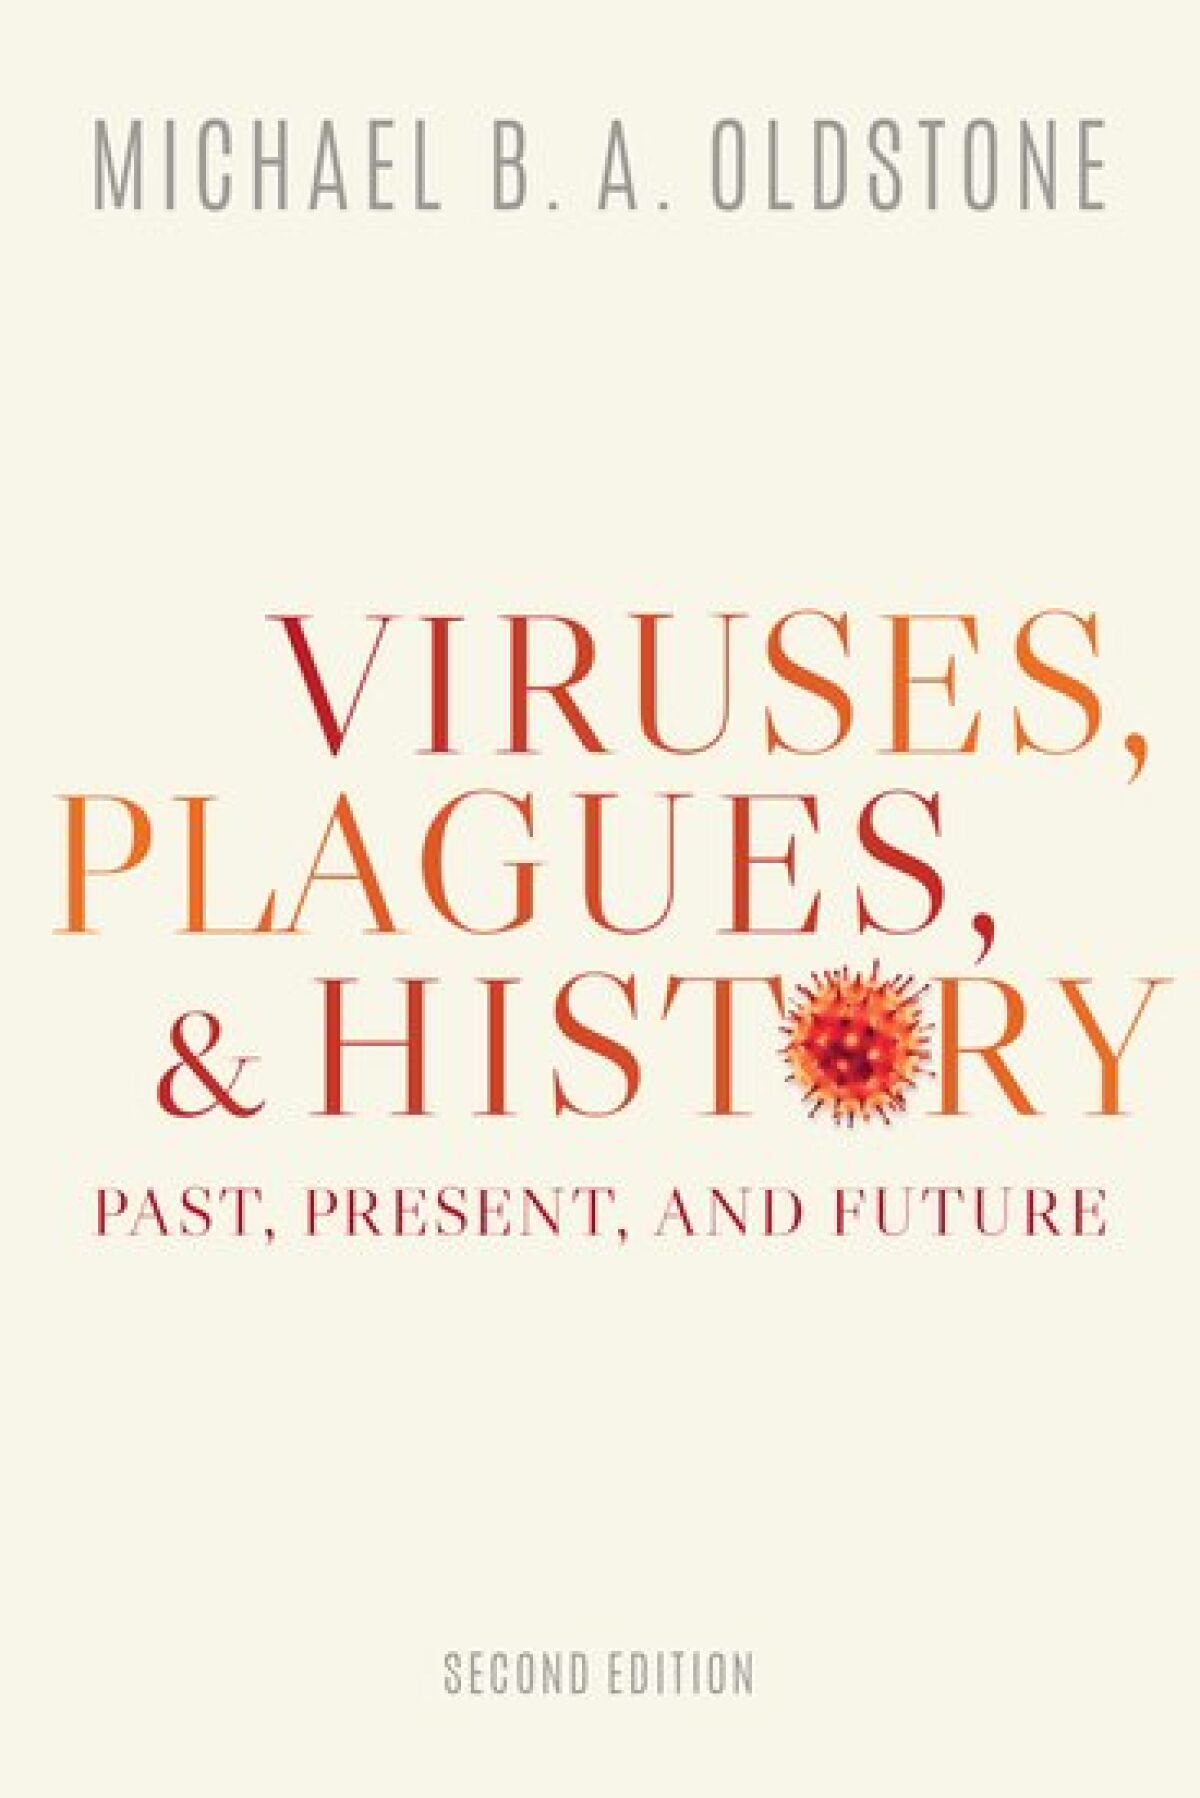 Michael Oldstone's book, updated this year, draws parallels between the coronavirus pandemic and health crises of the past.